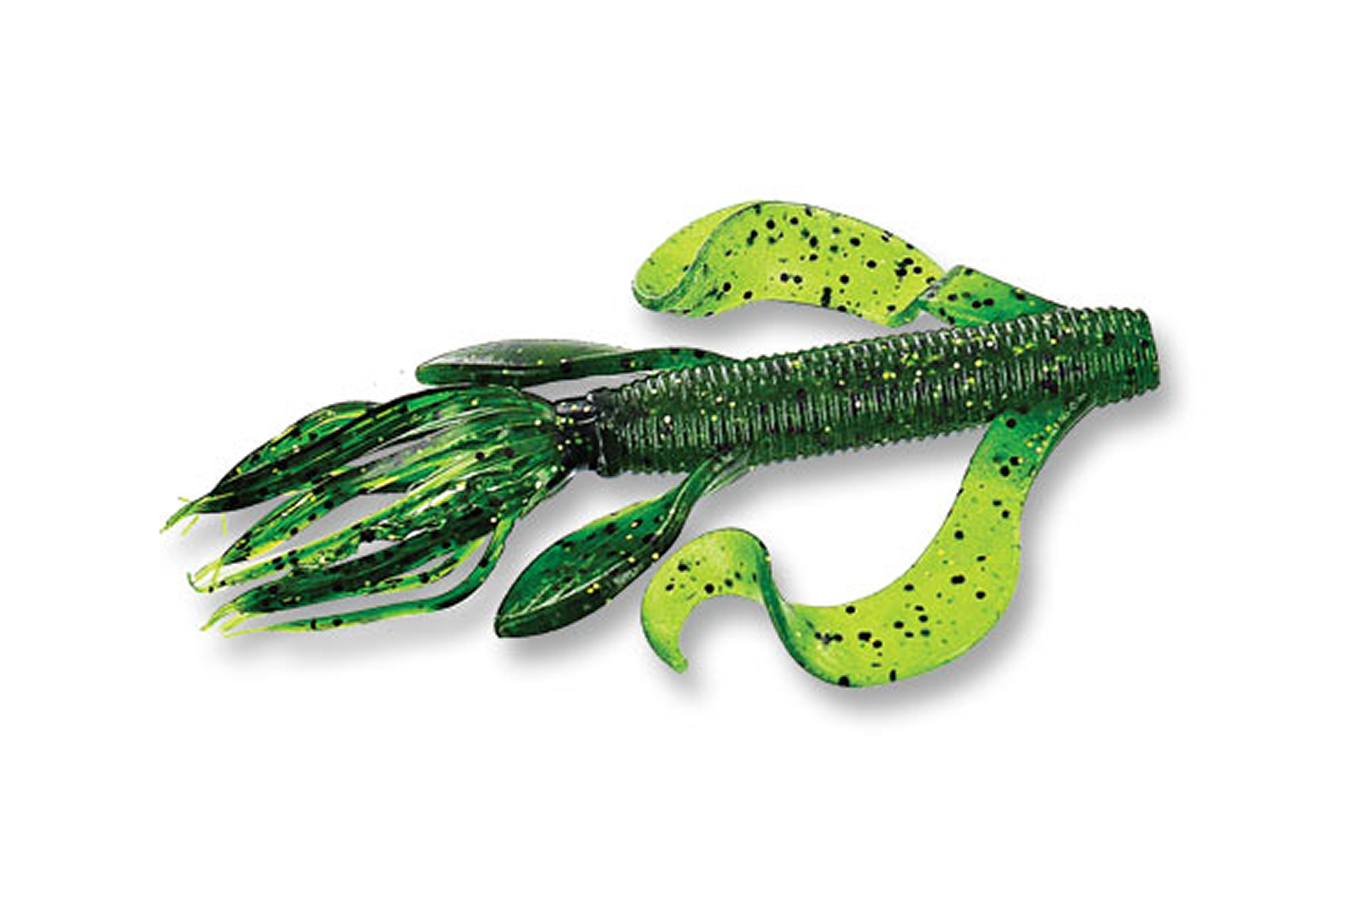 Discount Gary Yamamoto 4 Inch Kreature for Sale, Online Fishing Baits  Store